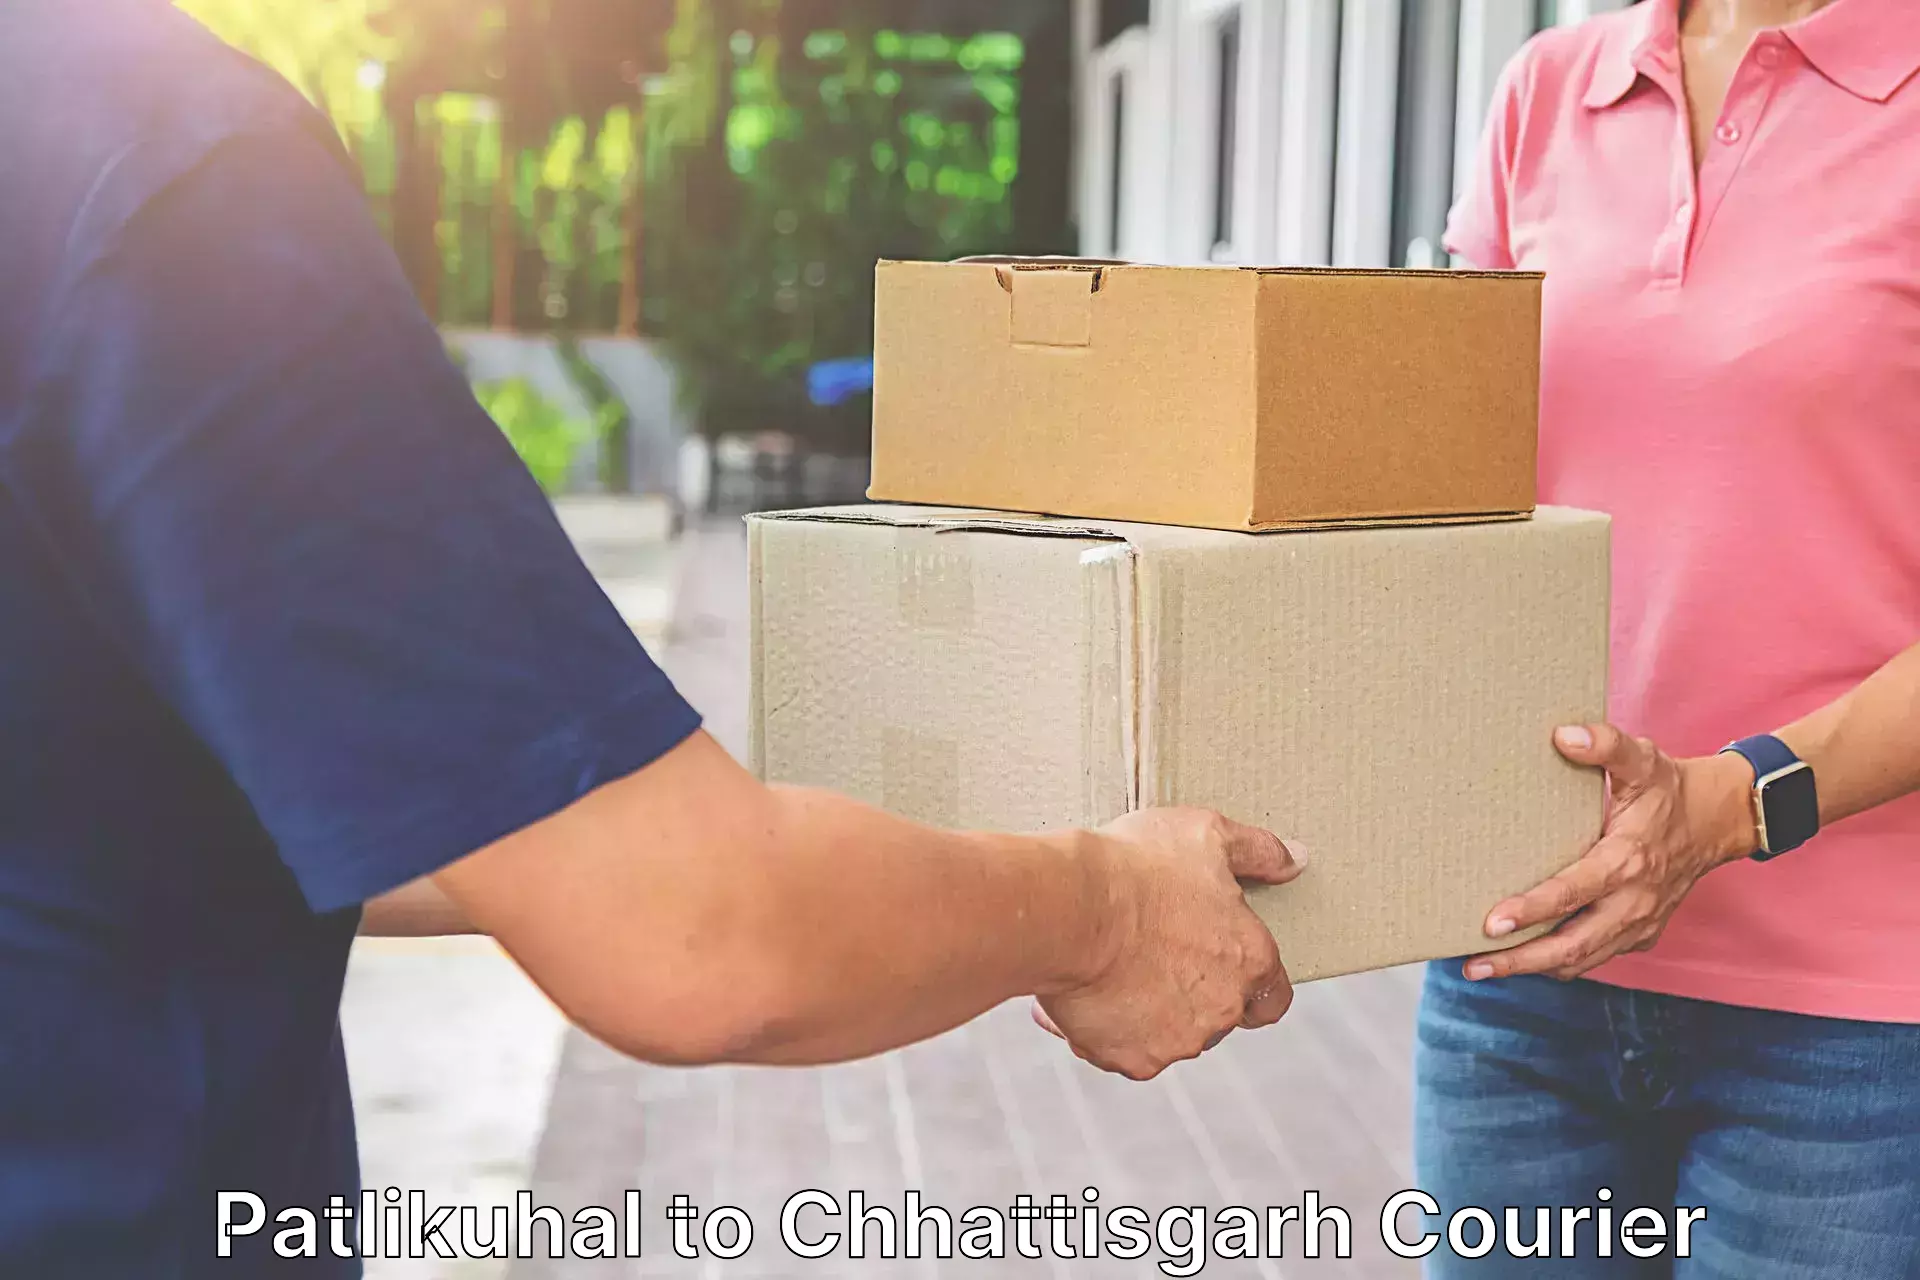 Reliable courier service Patlikuhal to Ramanujganj